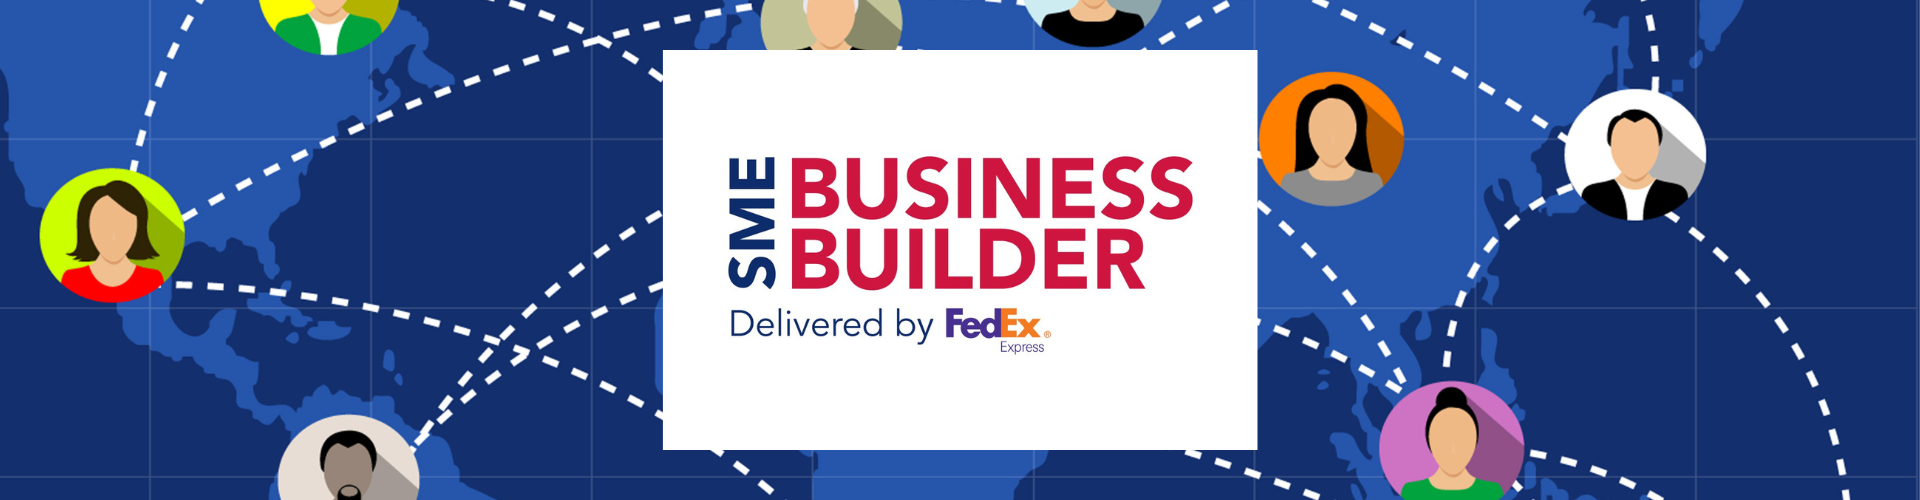 thumbnails SME Business Builder- E-Commerce - Industry Growth and Challenges